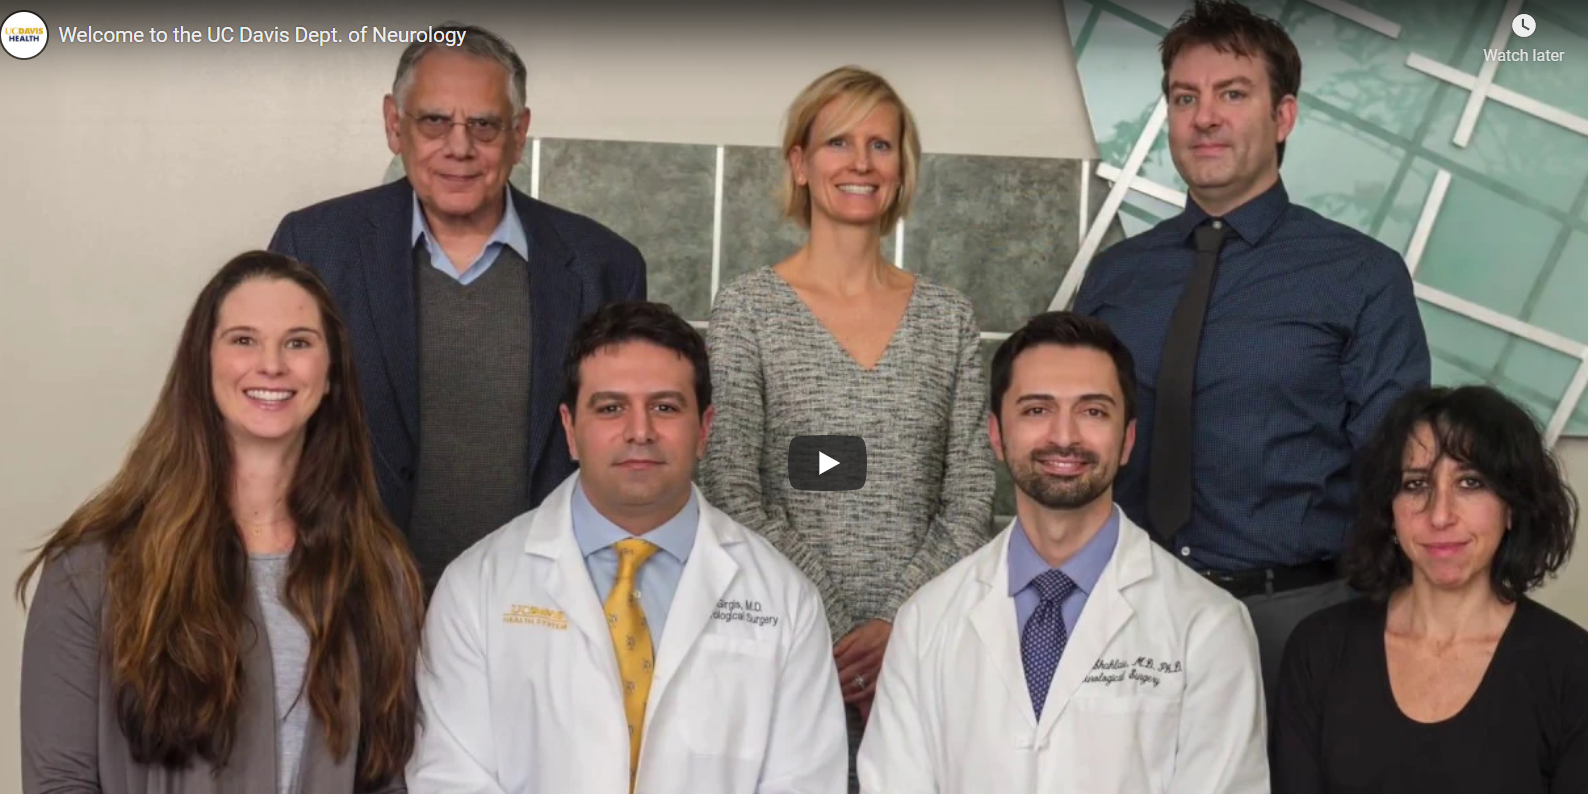 WATCH VIDEO - Neurology providers in a group